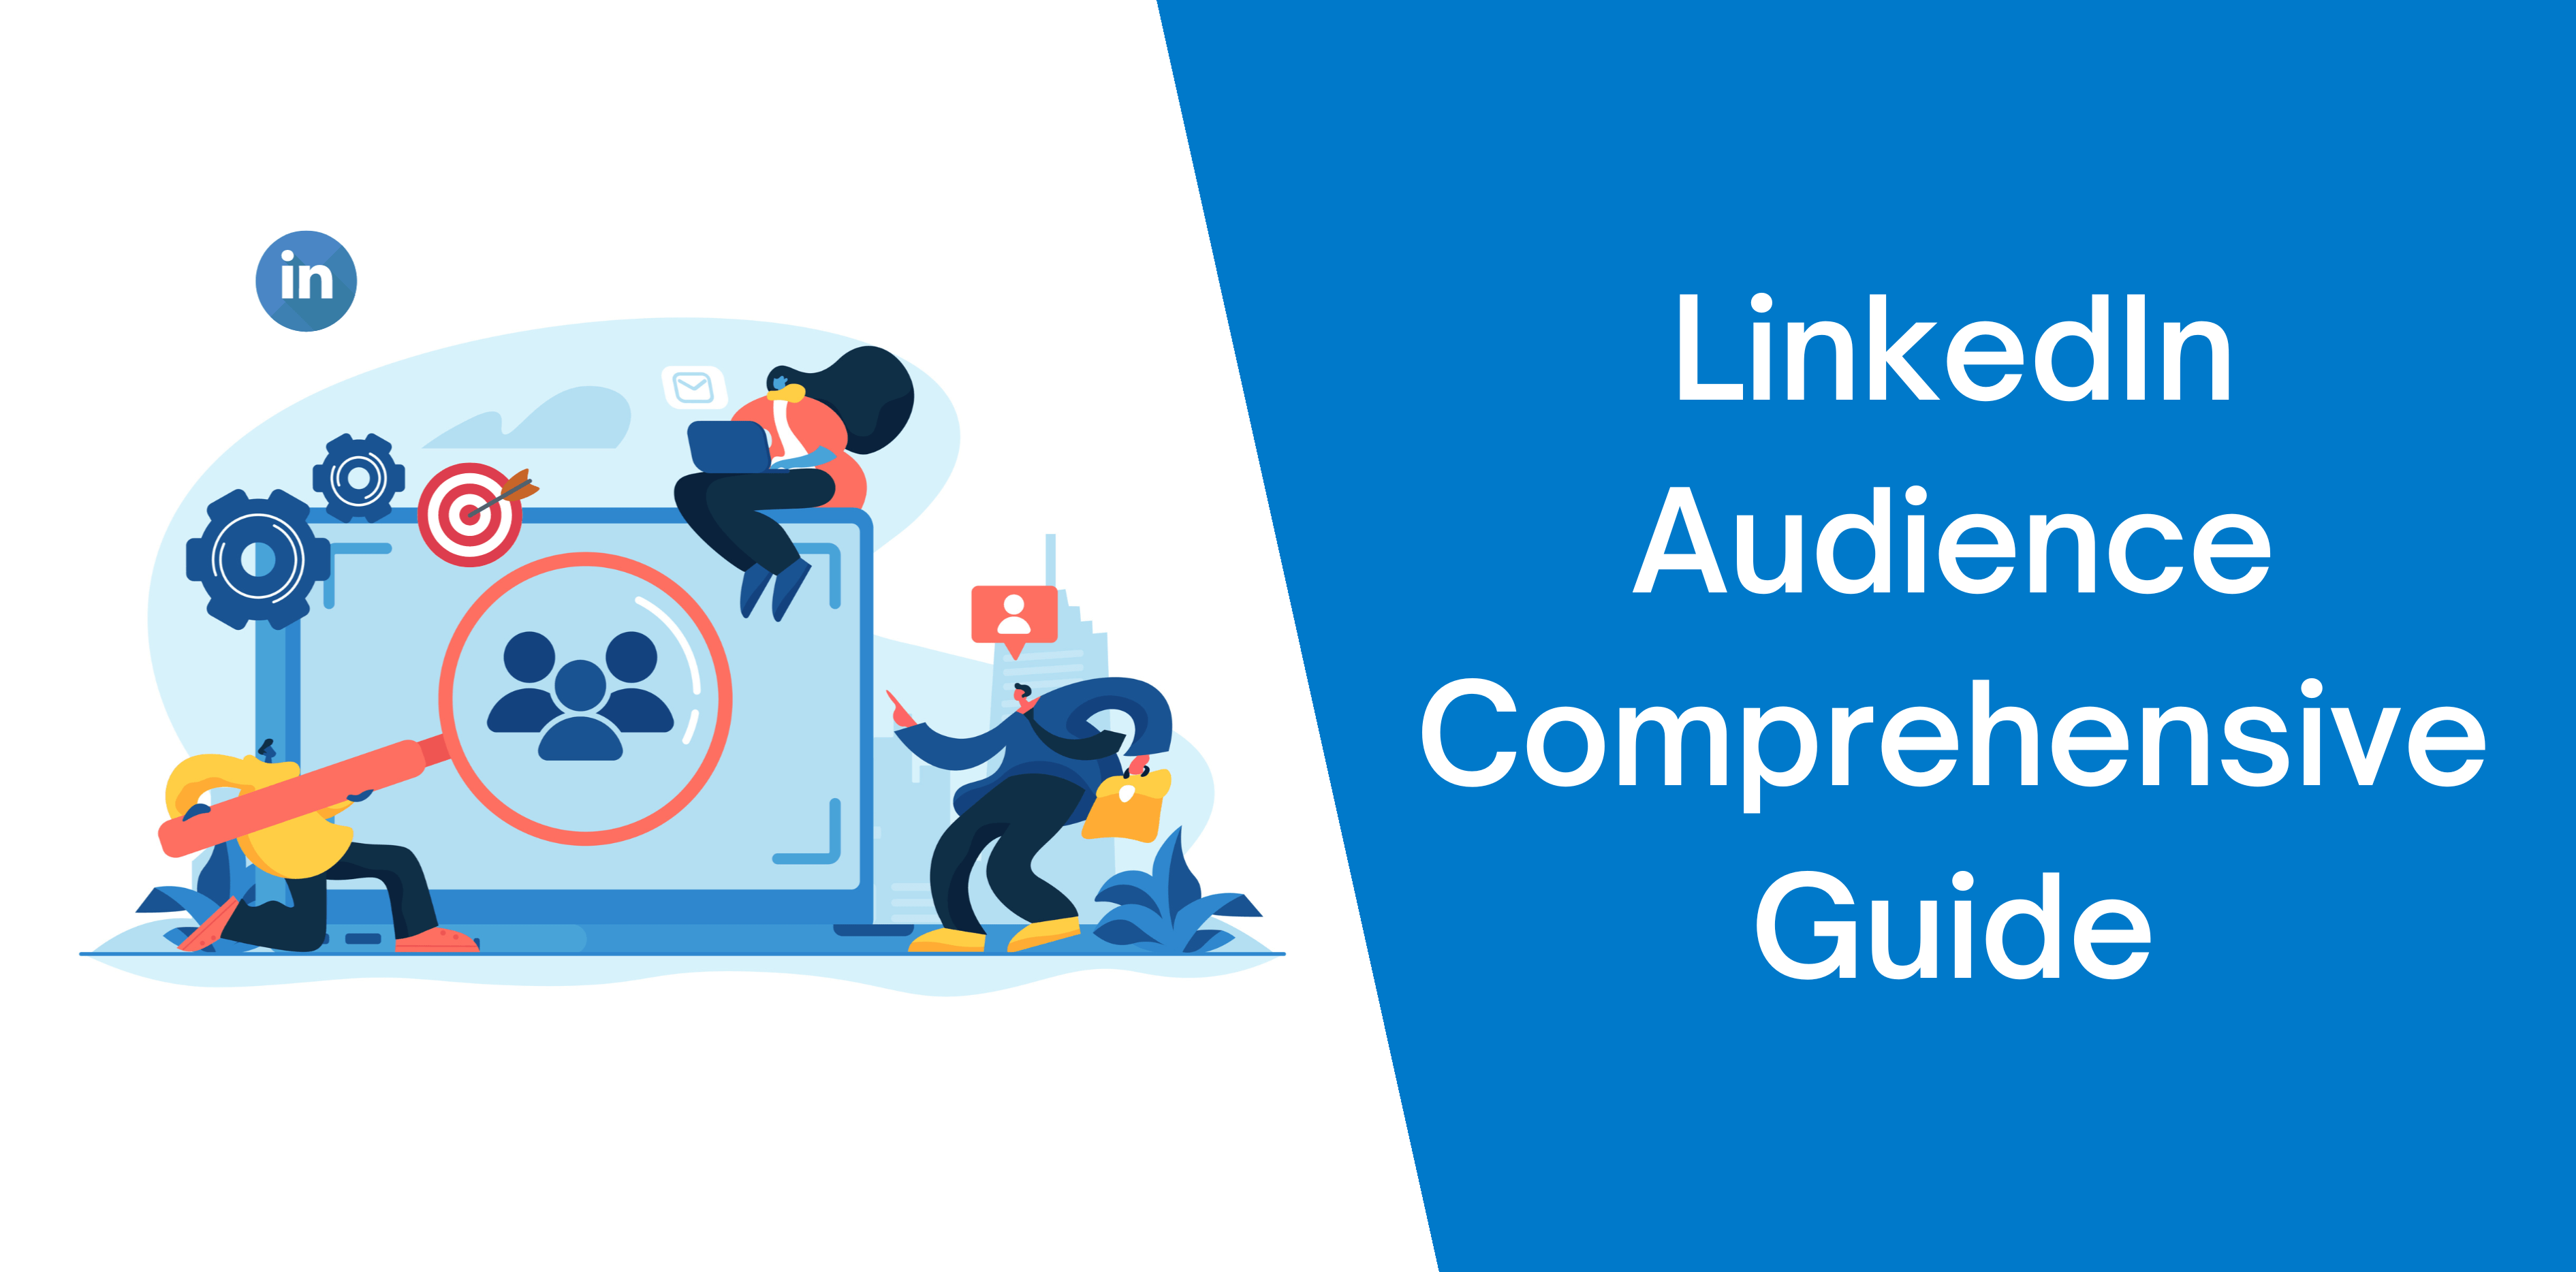 Thumbnail-LinkedIn-Audience-Comprehensive-Guide